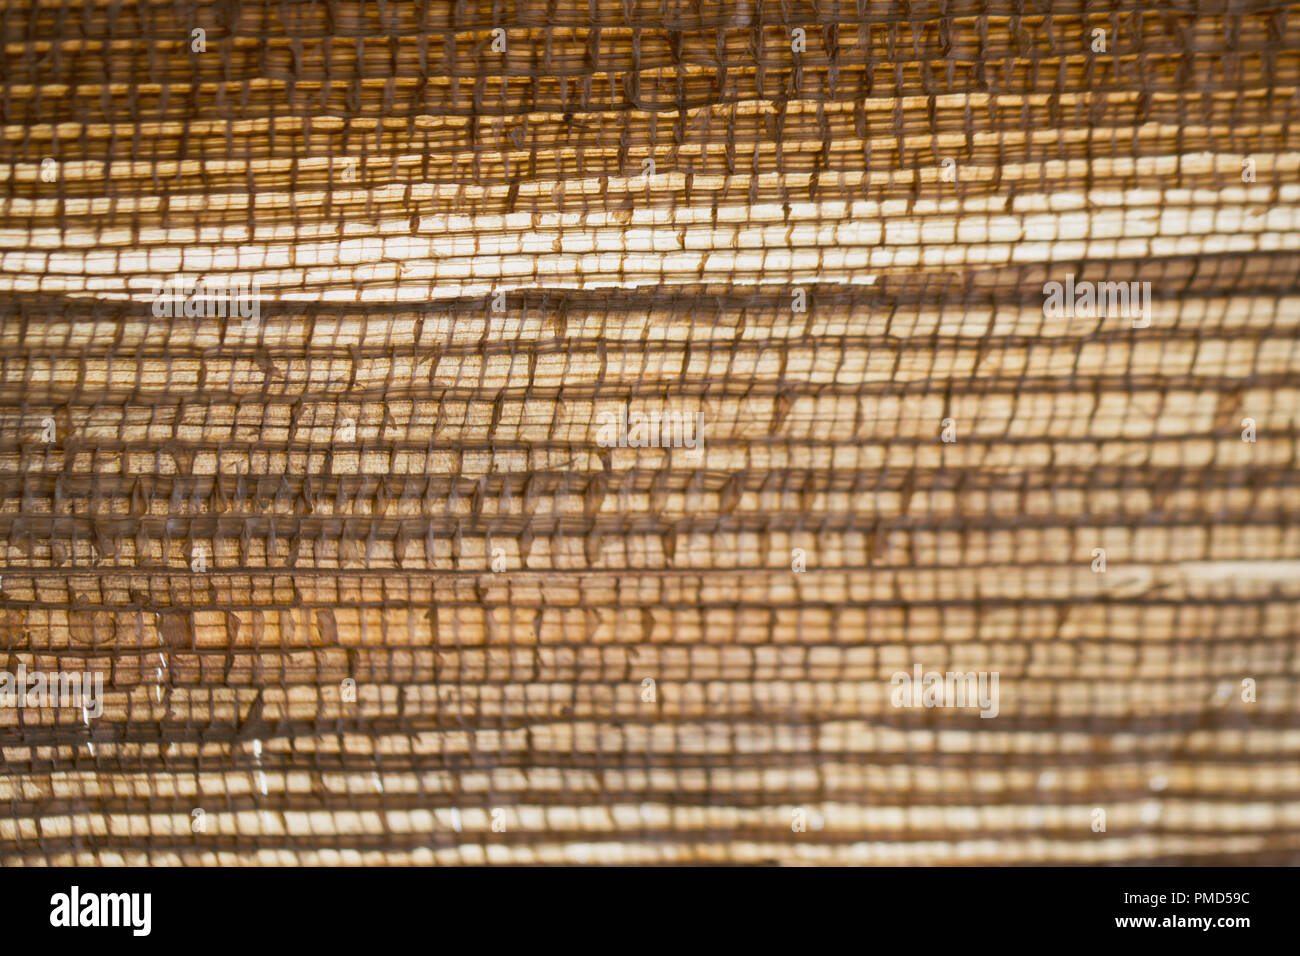 Close-up studio image of backlit handmade banana paper showing details and textures, backdrop Stock Photo